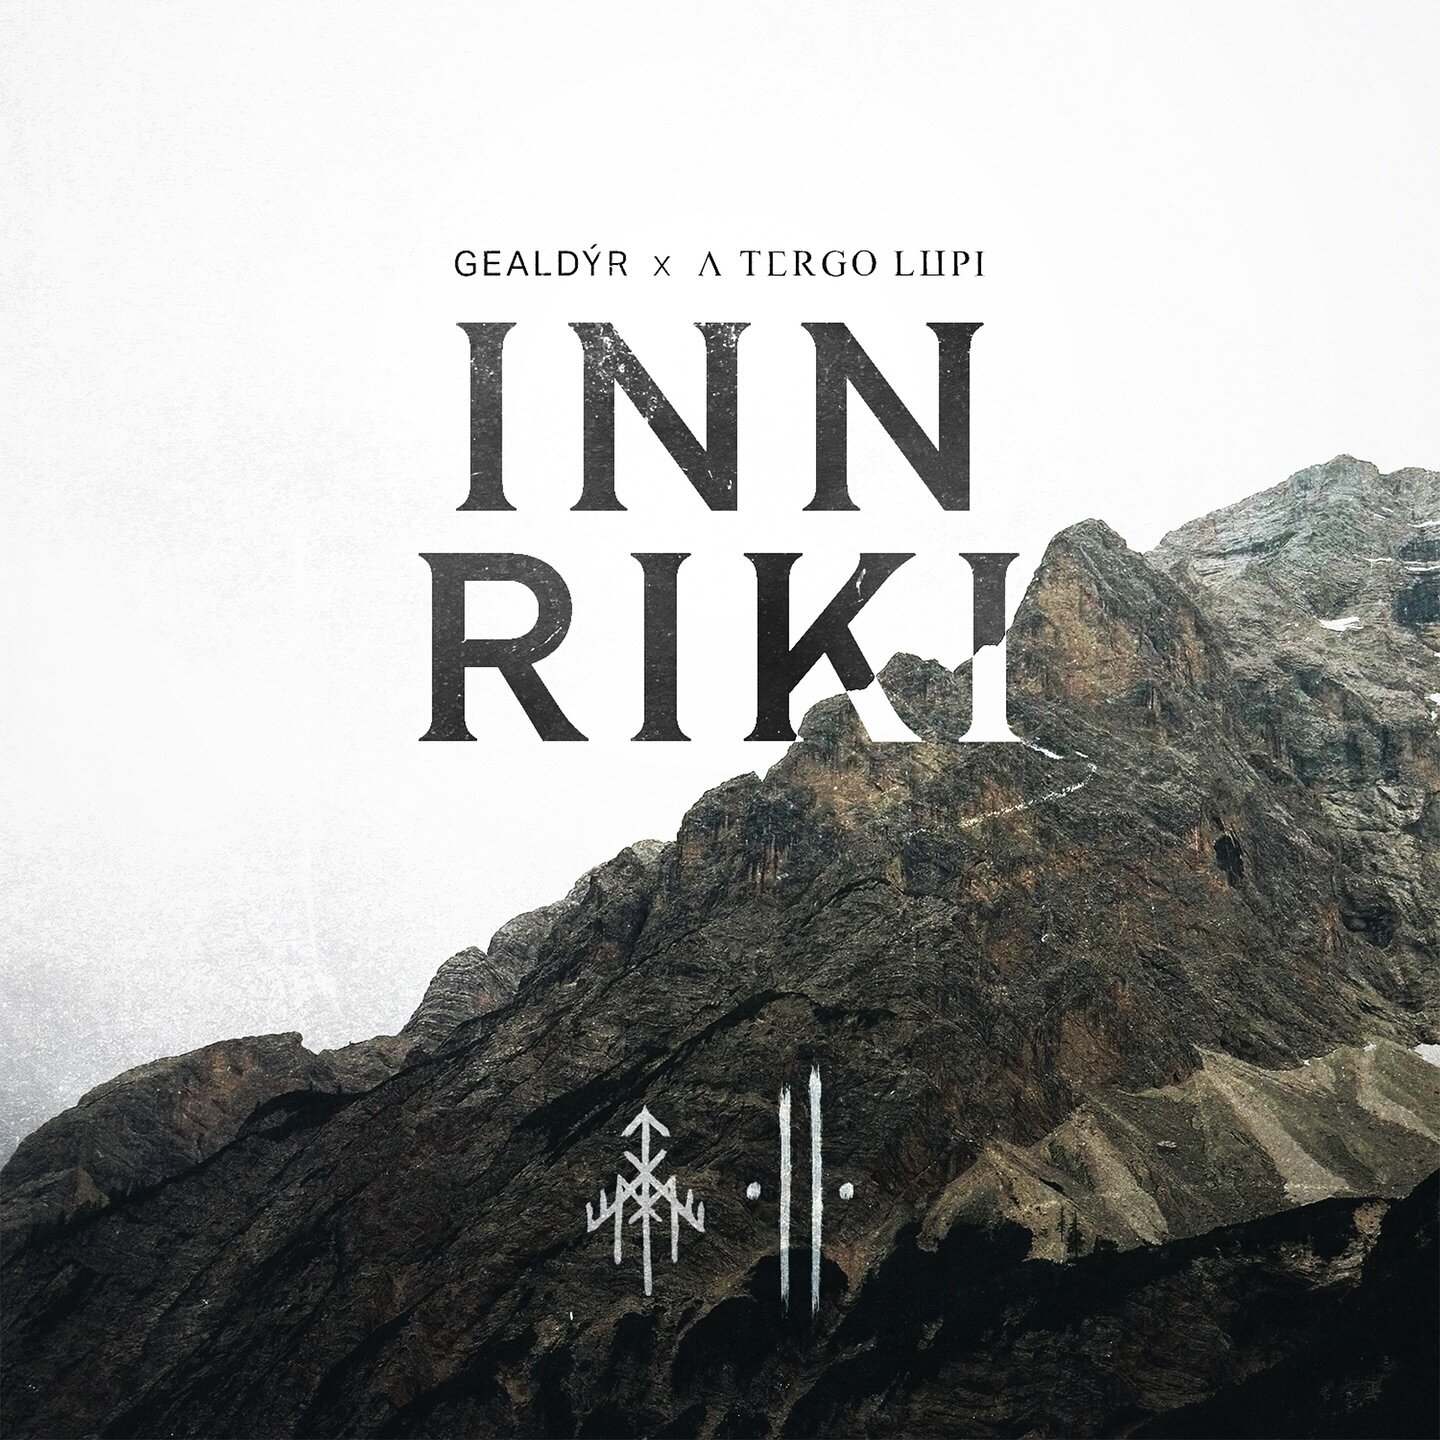 @atergolupi_ and I present you all our new song Inn Riki which is now available on all digital platforms!

#geald&yacute;r #atergolupi #innriki #spotify #norse #norsemythology #musicvideo #nordicfolk #darkfolk #pagan #pagansoul #naturevideo #tagelhar